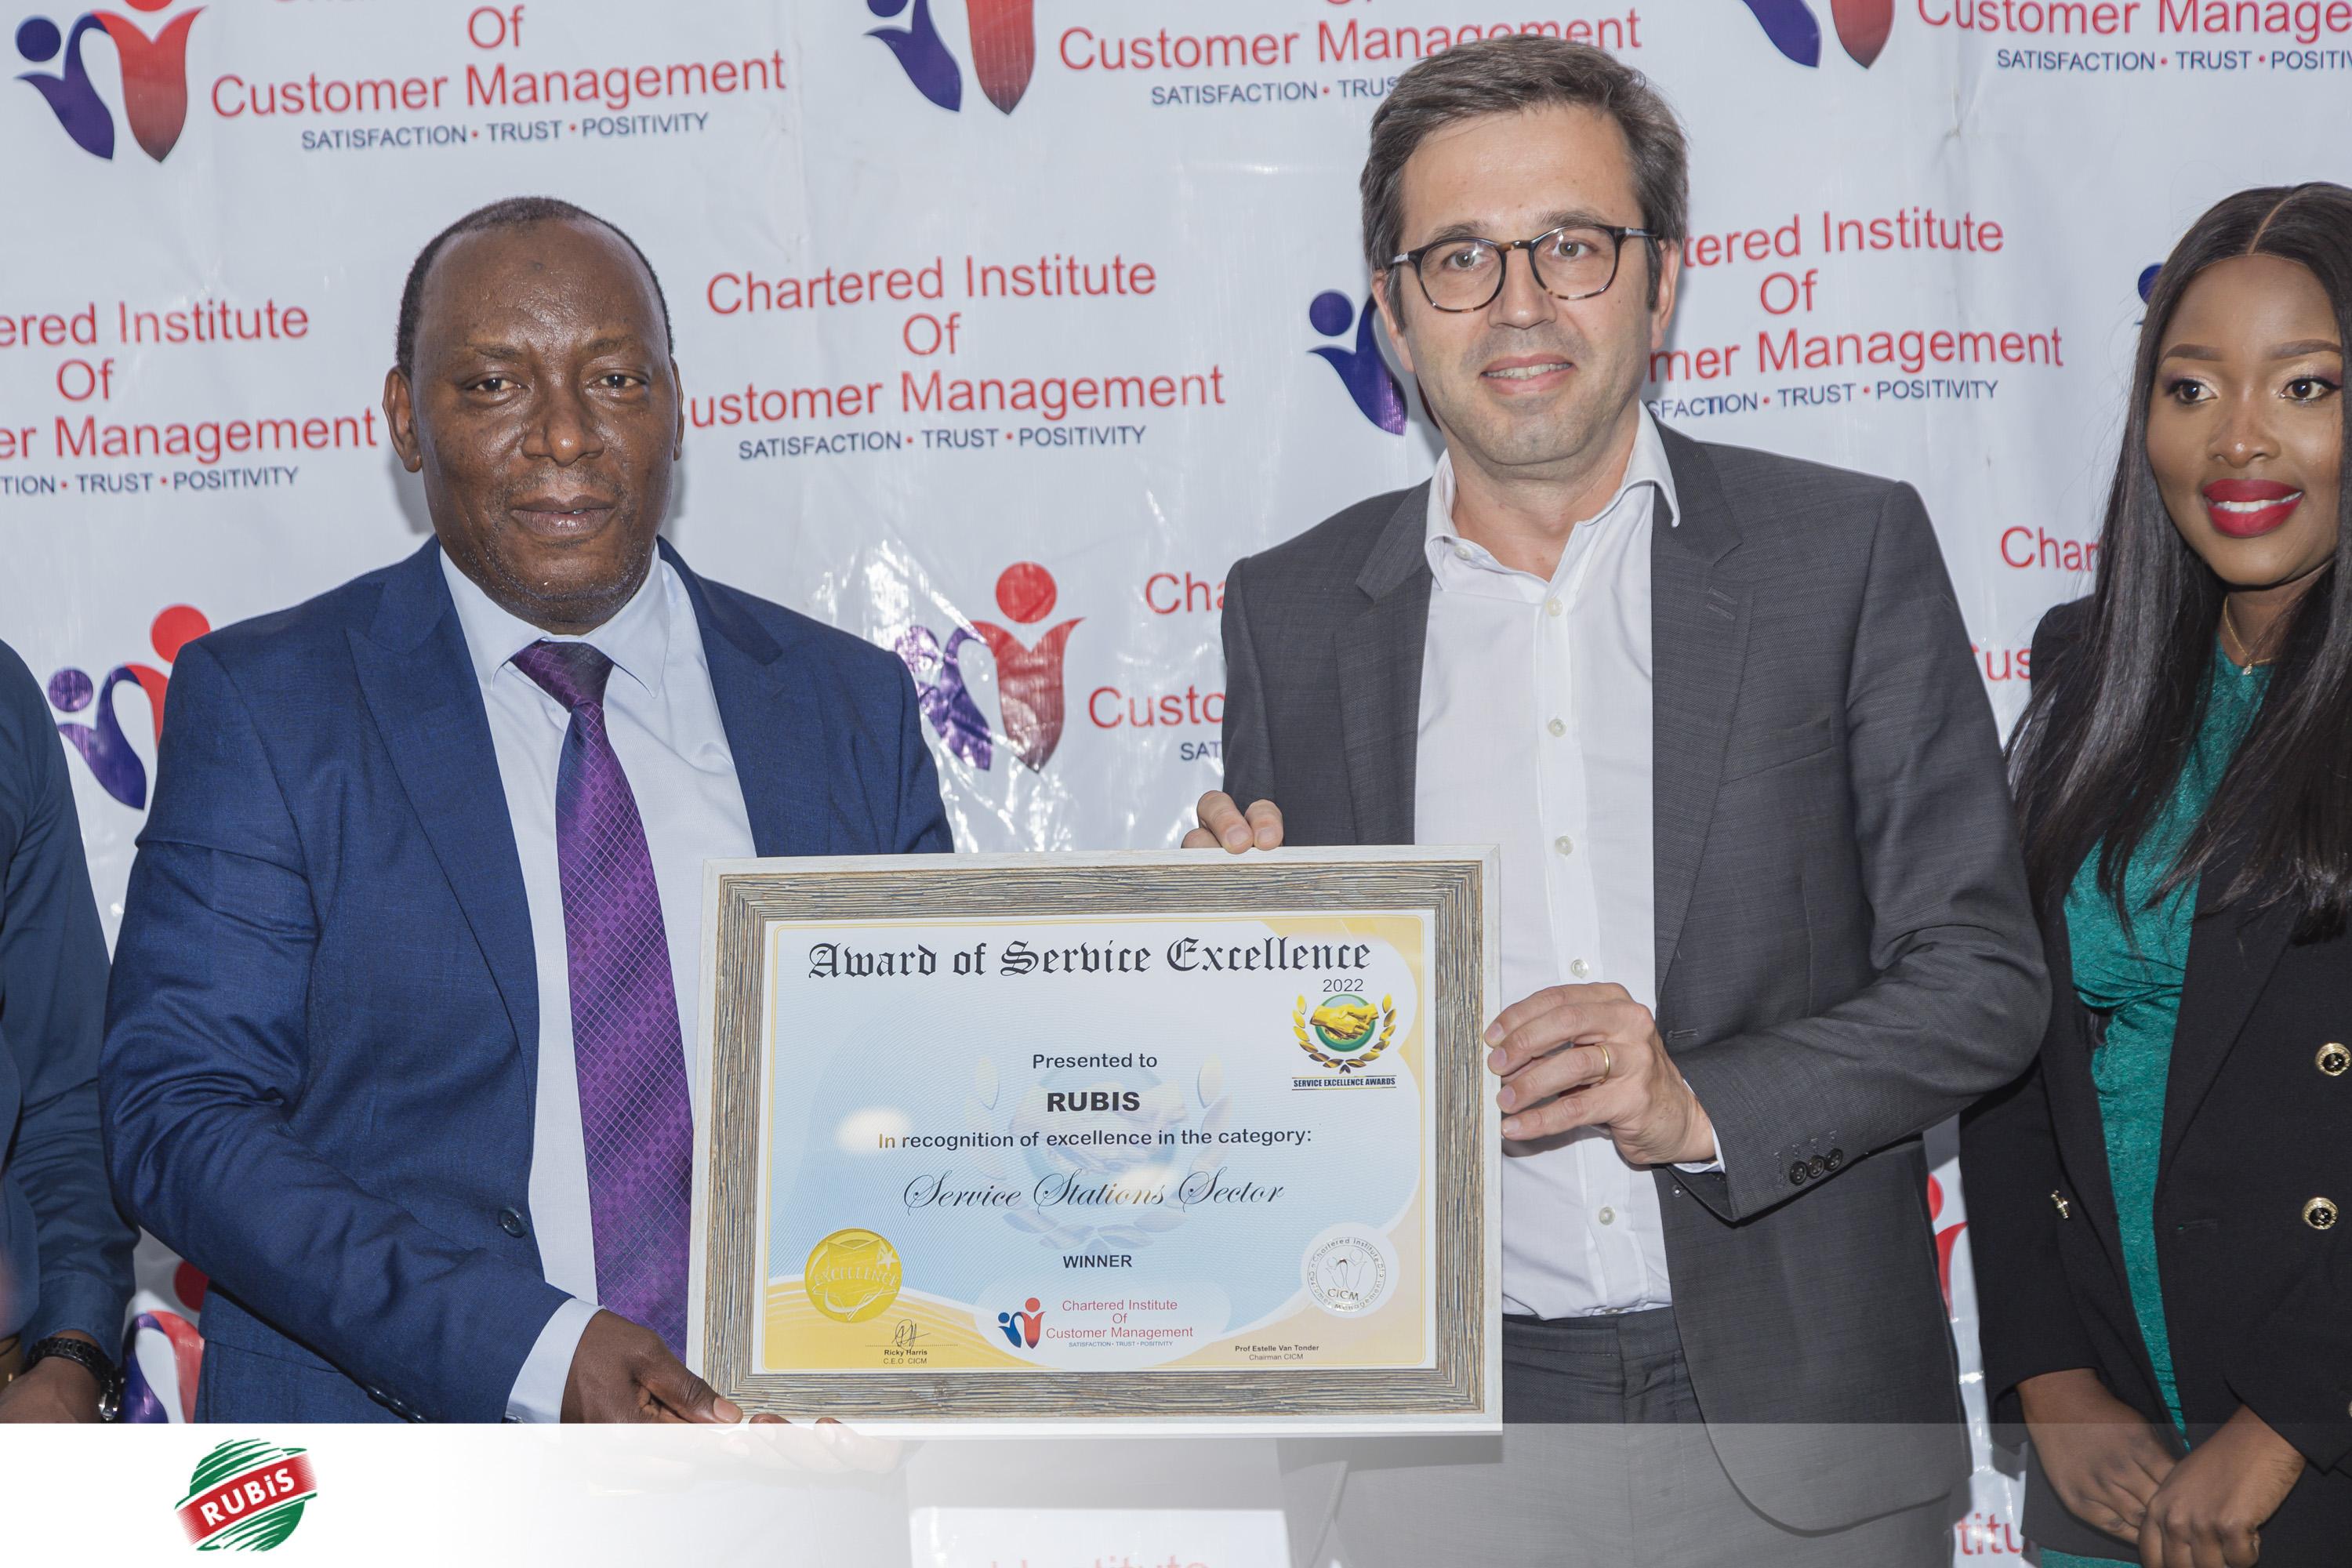 RUBIS ENERGY ZAMBIA SCOOPS 2022 BEST CUSTOMER SERVICE EXCELLENCE AWARD. THANK YOU FOR MAKING US YOUR SERVICE STATION OF CHOICE.